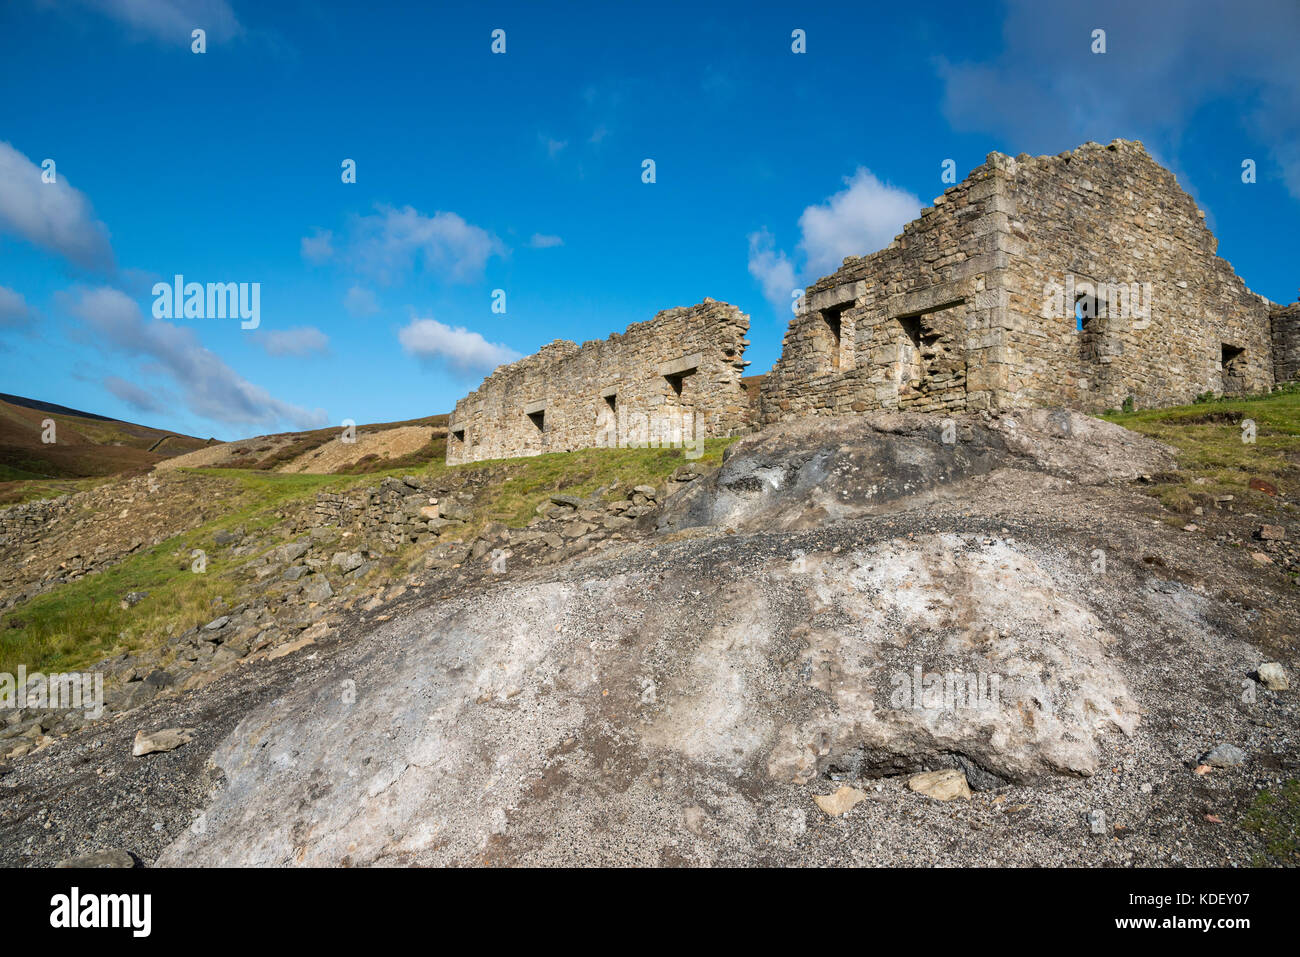 Ruins of Surrender Lead Smelting mill in the hills above Reeth, Swaledale in North Yorkshire, England. Stock Photo